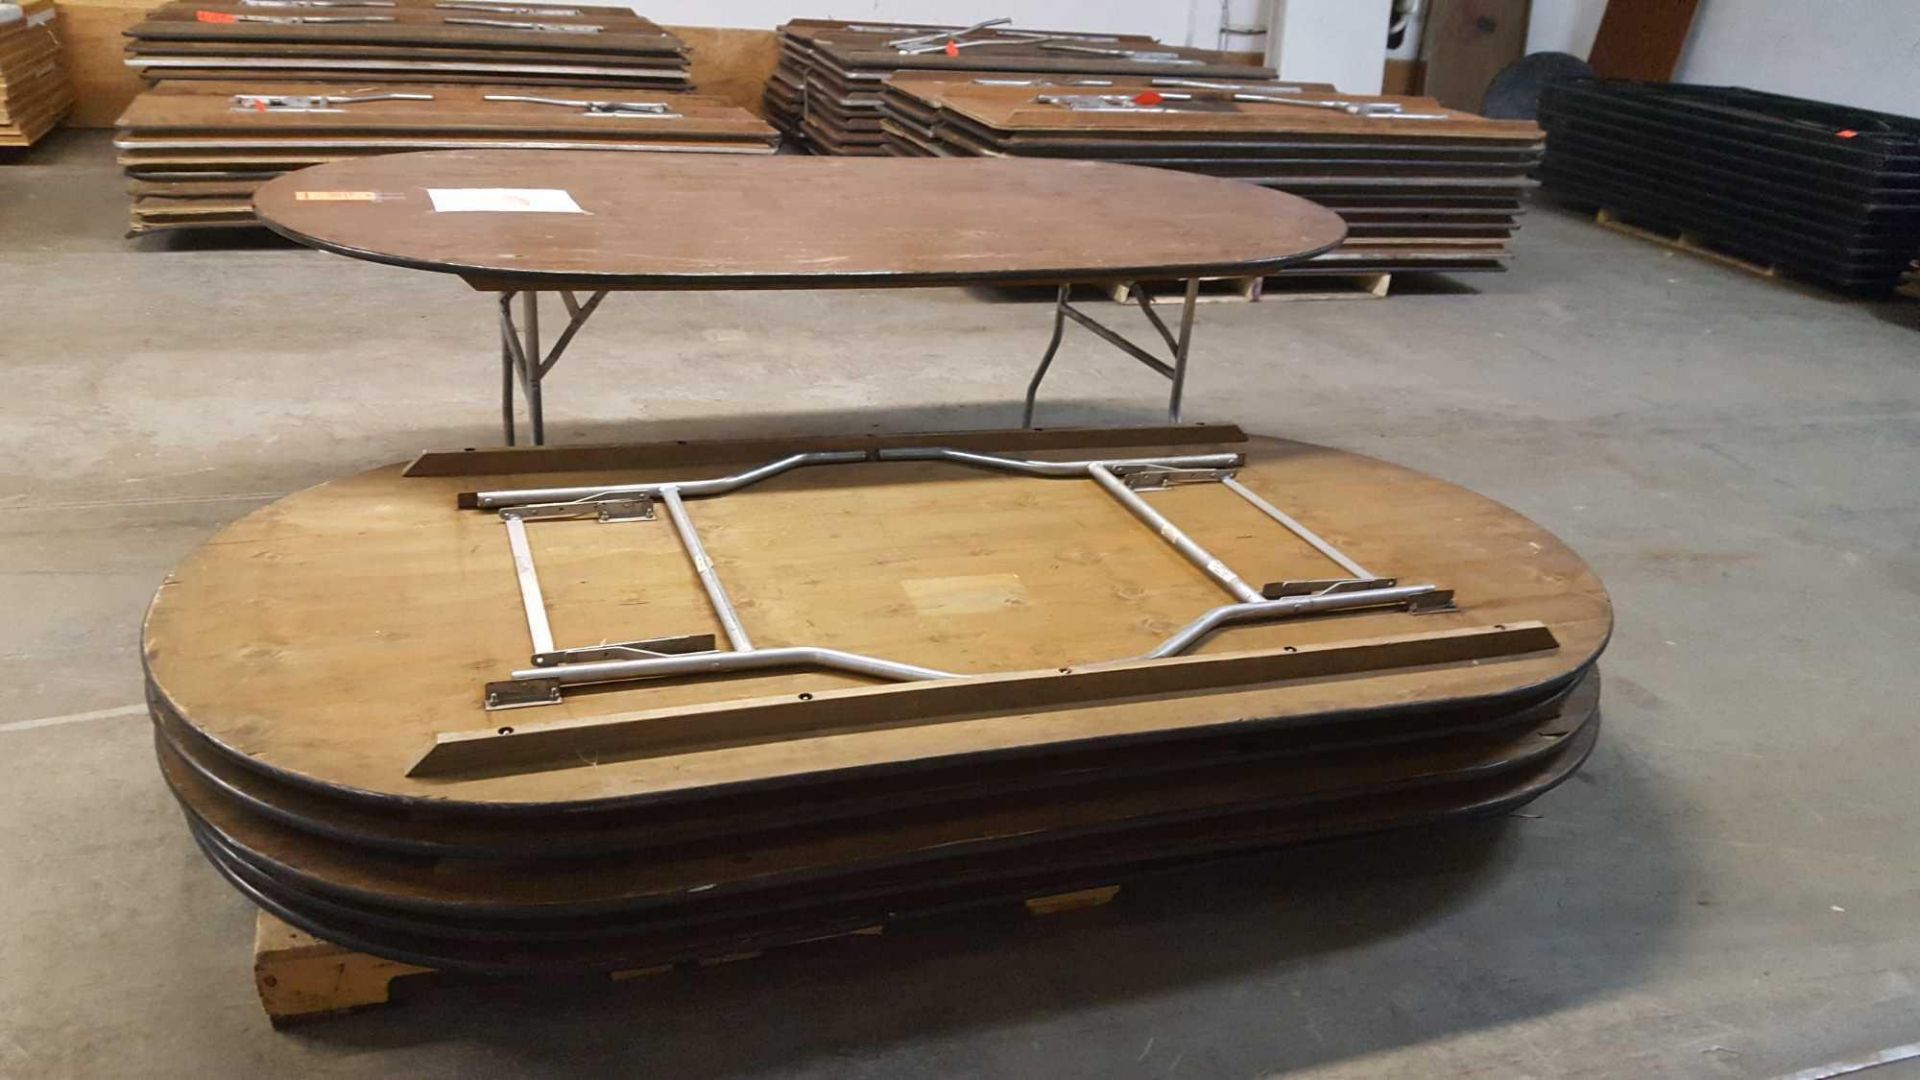 Lot of (6) Palmer racetrack tables, oval 84 inch by 48 inch by 30 in, with folding legs. - Image 3 of 4